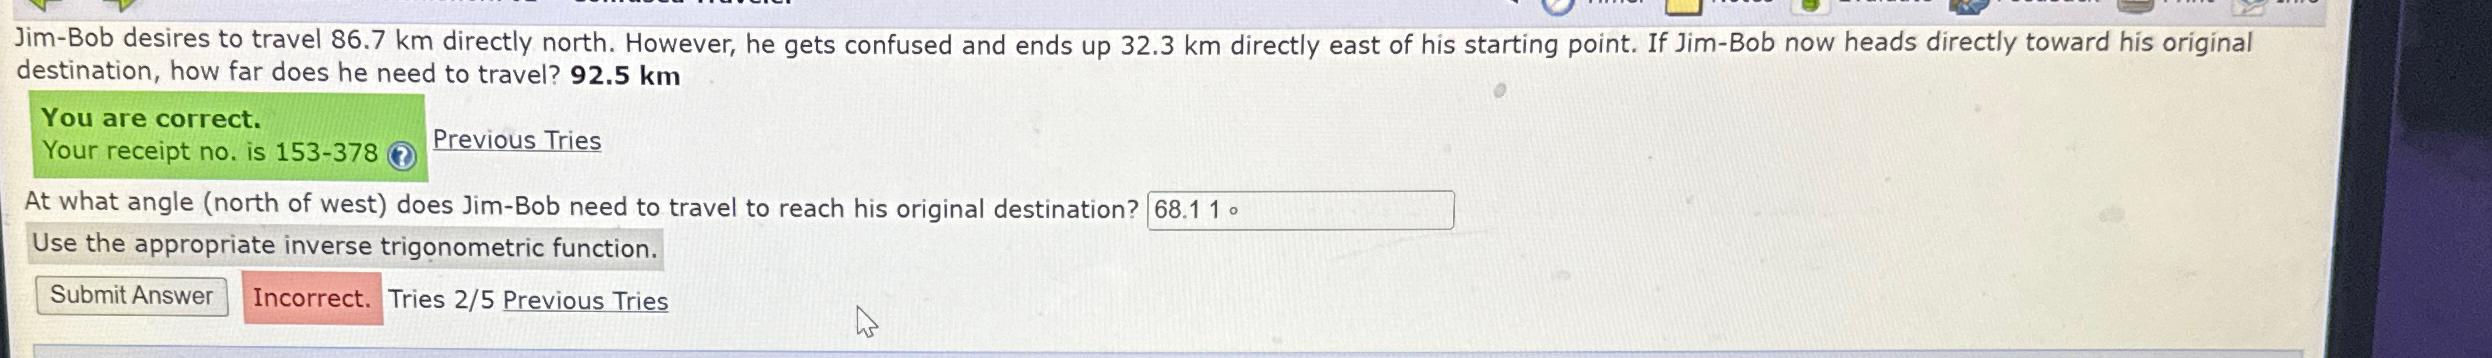 Jim-Bob desires to travel 86.7 km directly north. However, he gets confused and ends up 32.3 km directly east